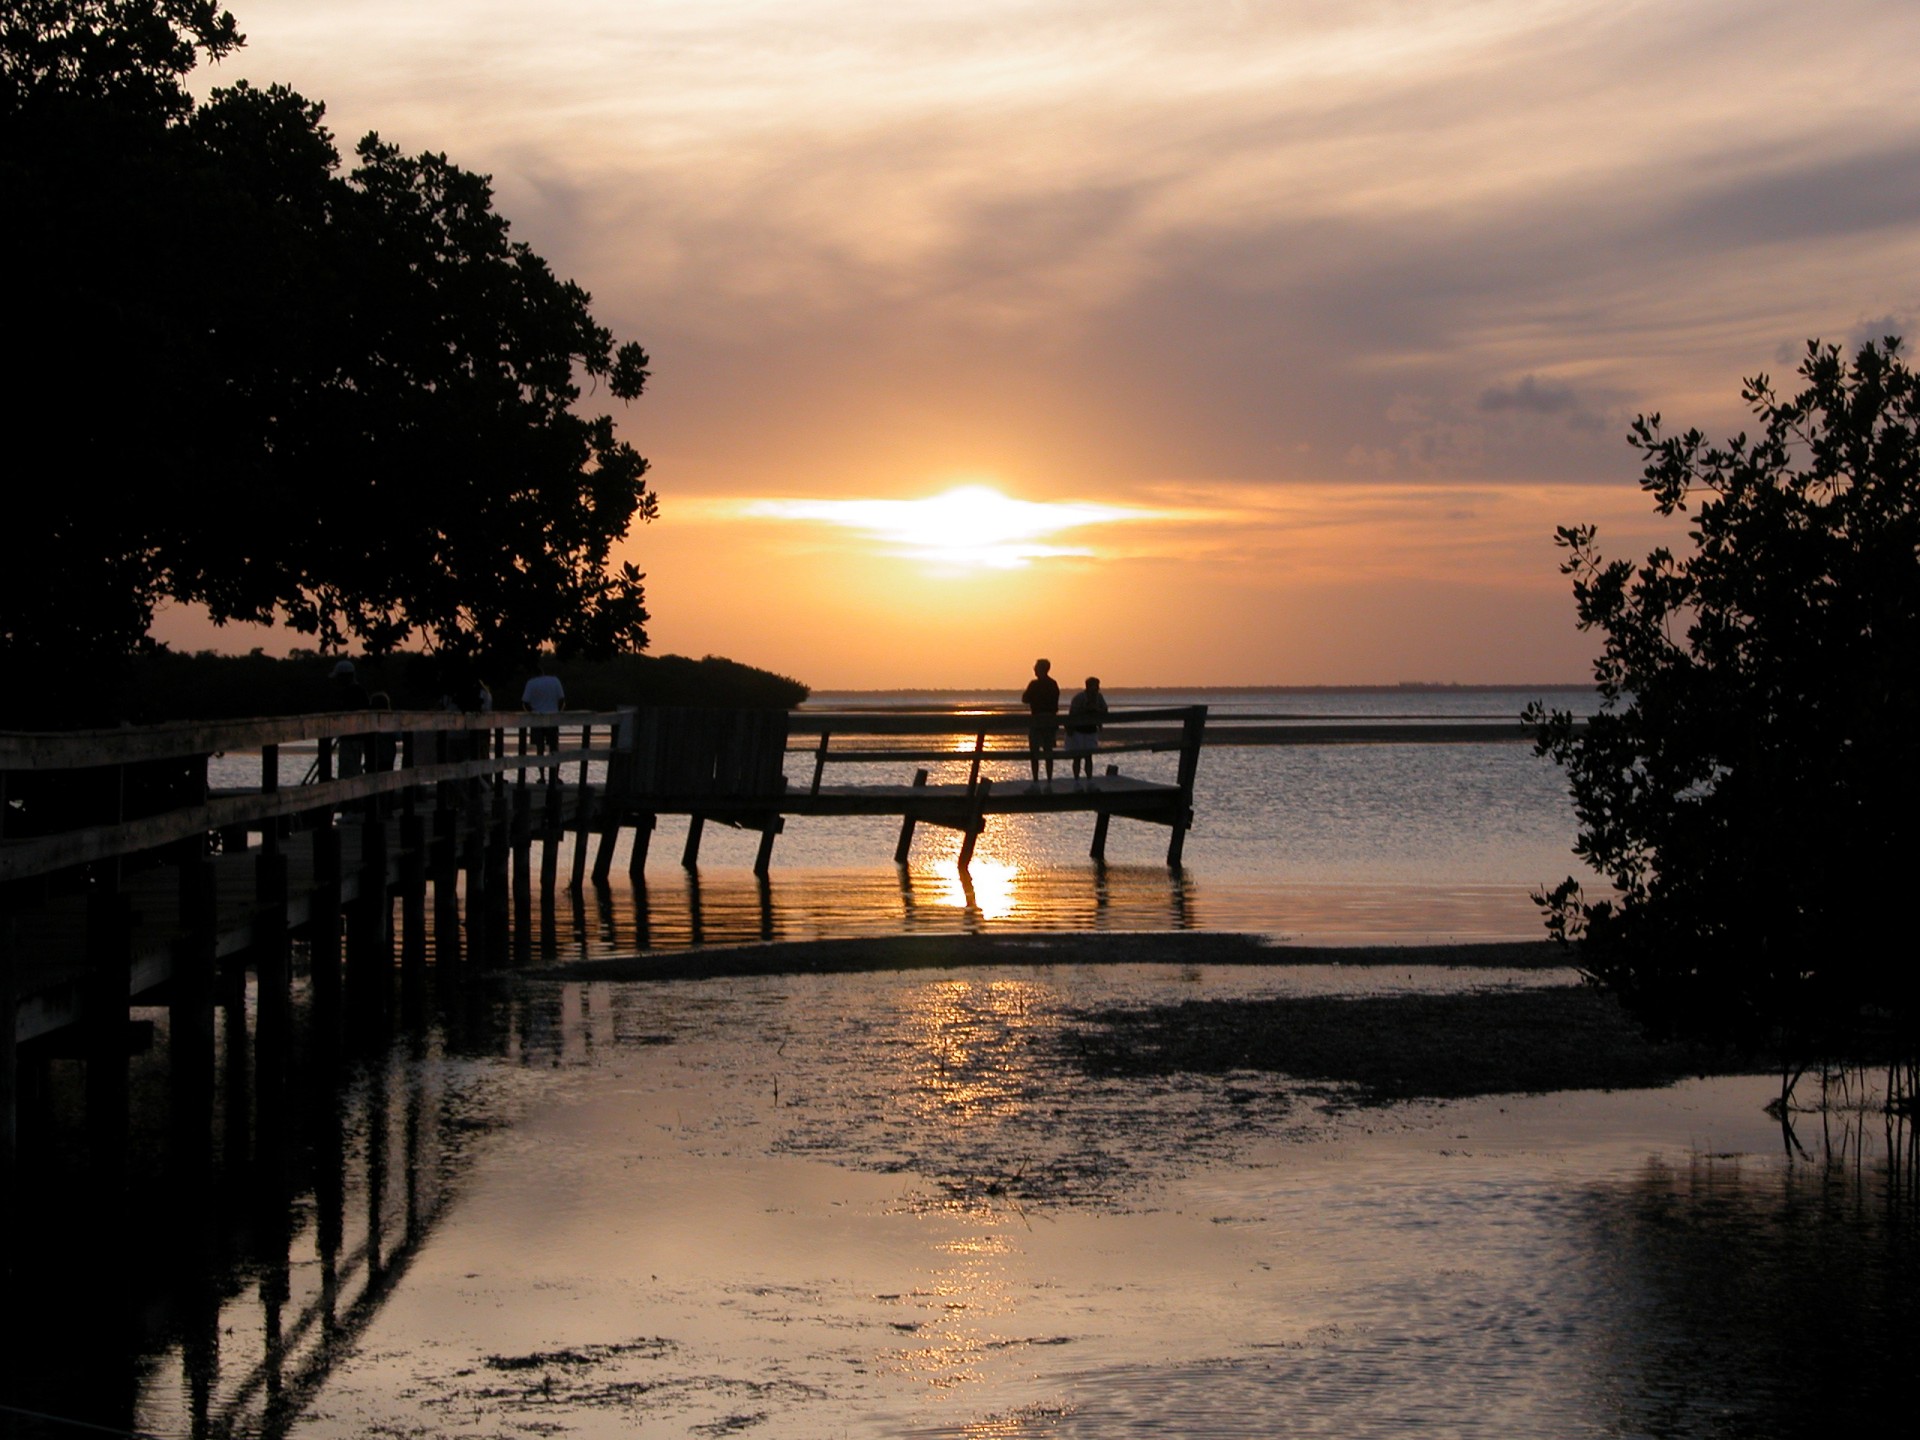 People watching a sunset on crooked pier at key West, Florida